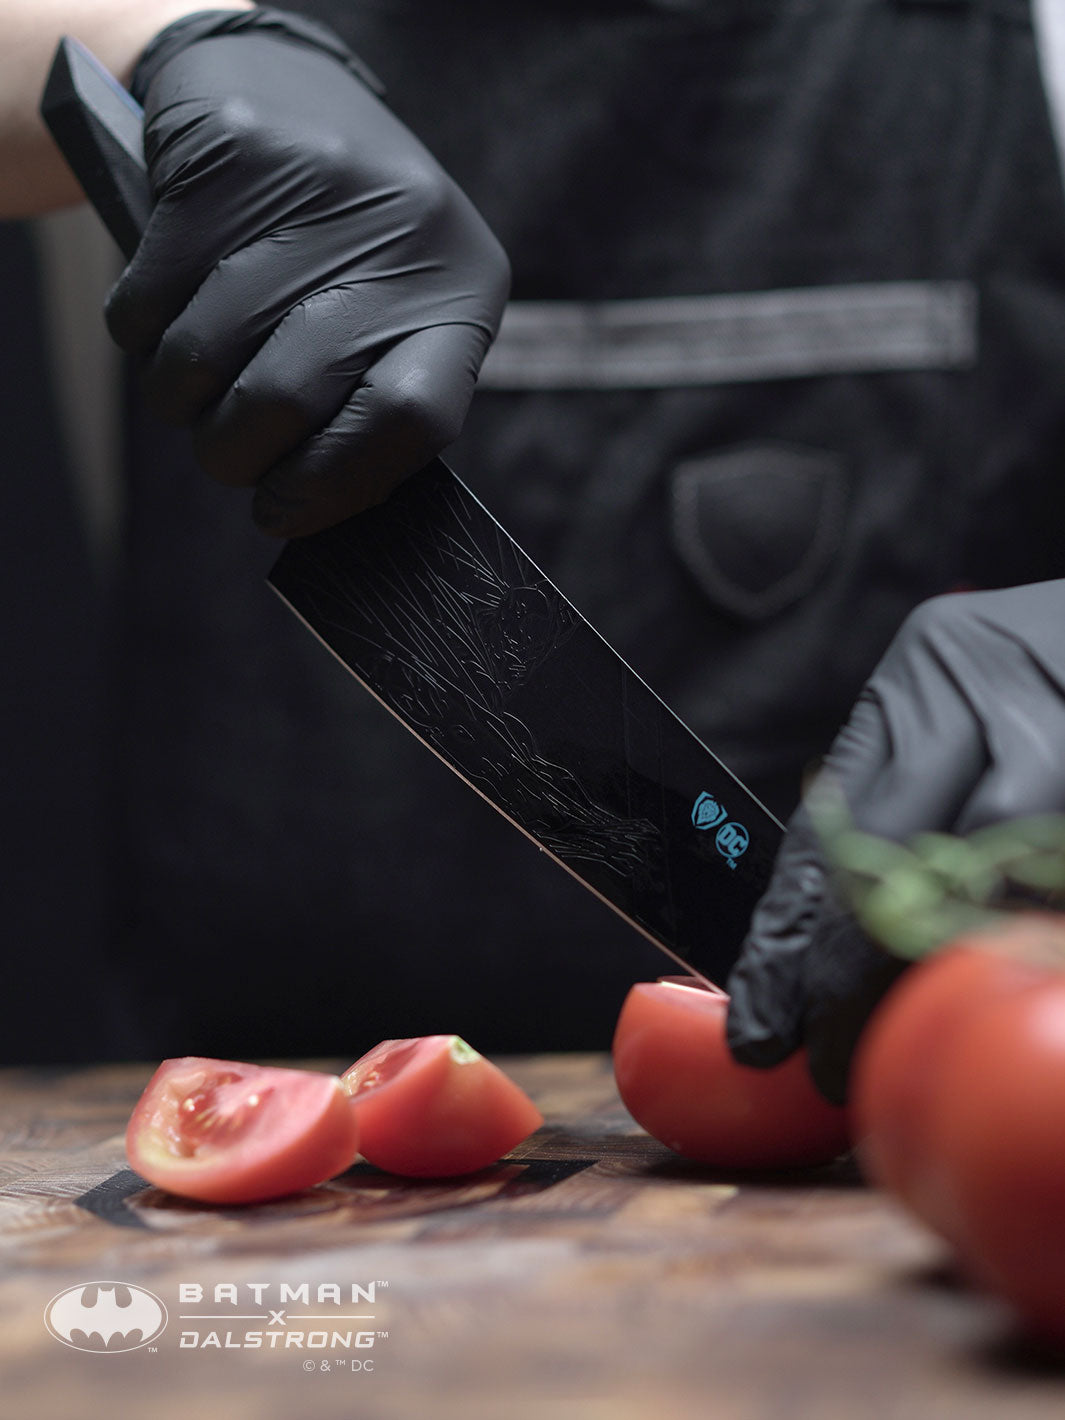 Dalstrong shadow black series 8 inch chef knife batman edition with cuts of tomatoes on a cutting board.